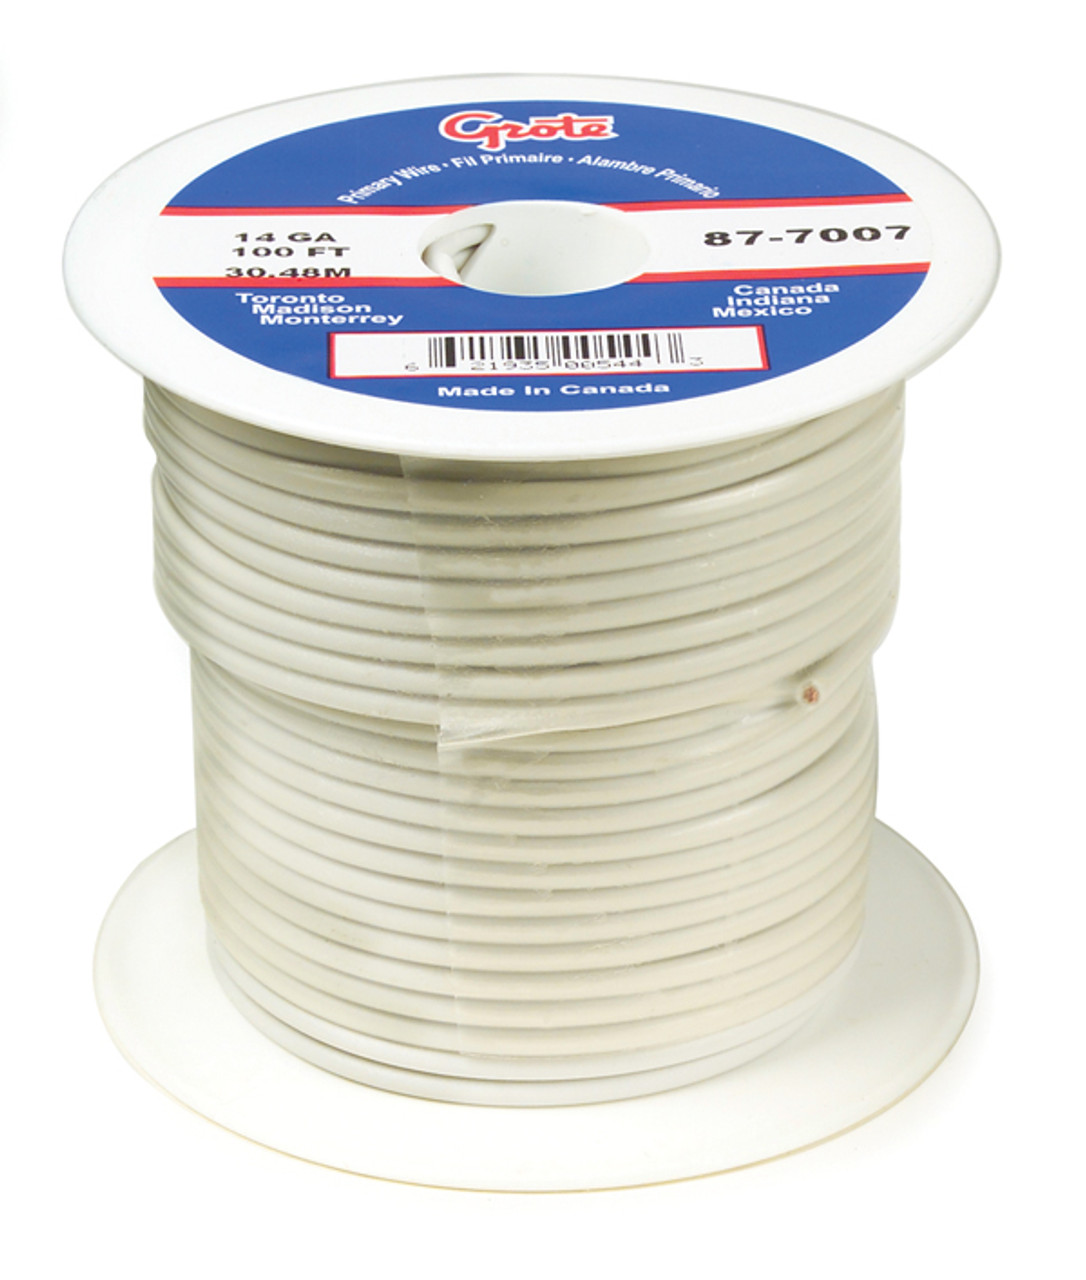 14 AWG General Purpose Thermo Plastic Wire @ 25' - White  89-7007